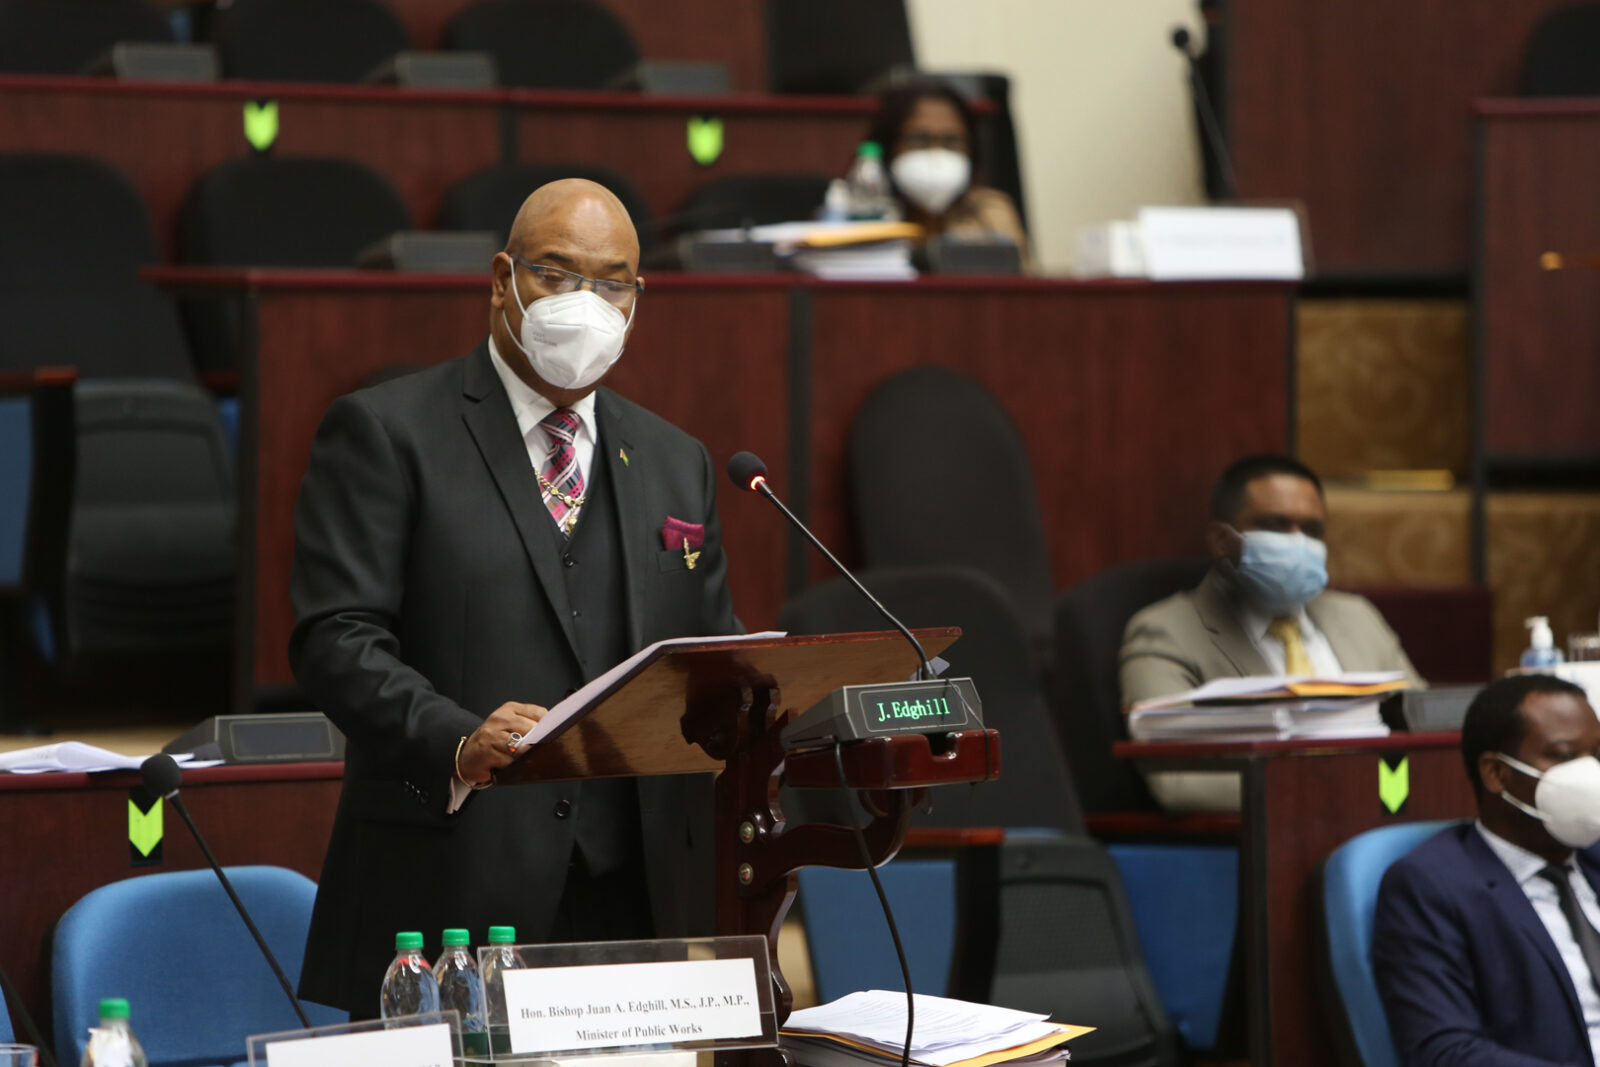 Minister of Public Works, the Hon. Bishop Juan Edghill, presenting the 2020 Budget